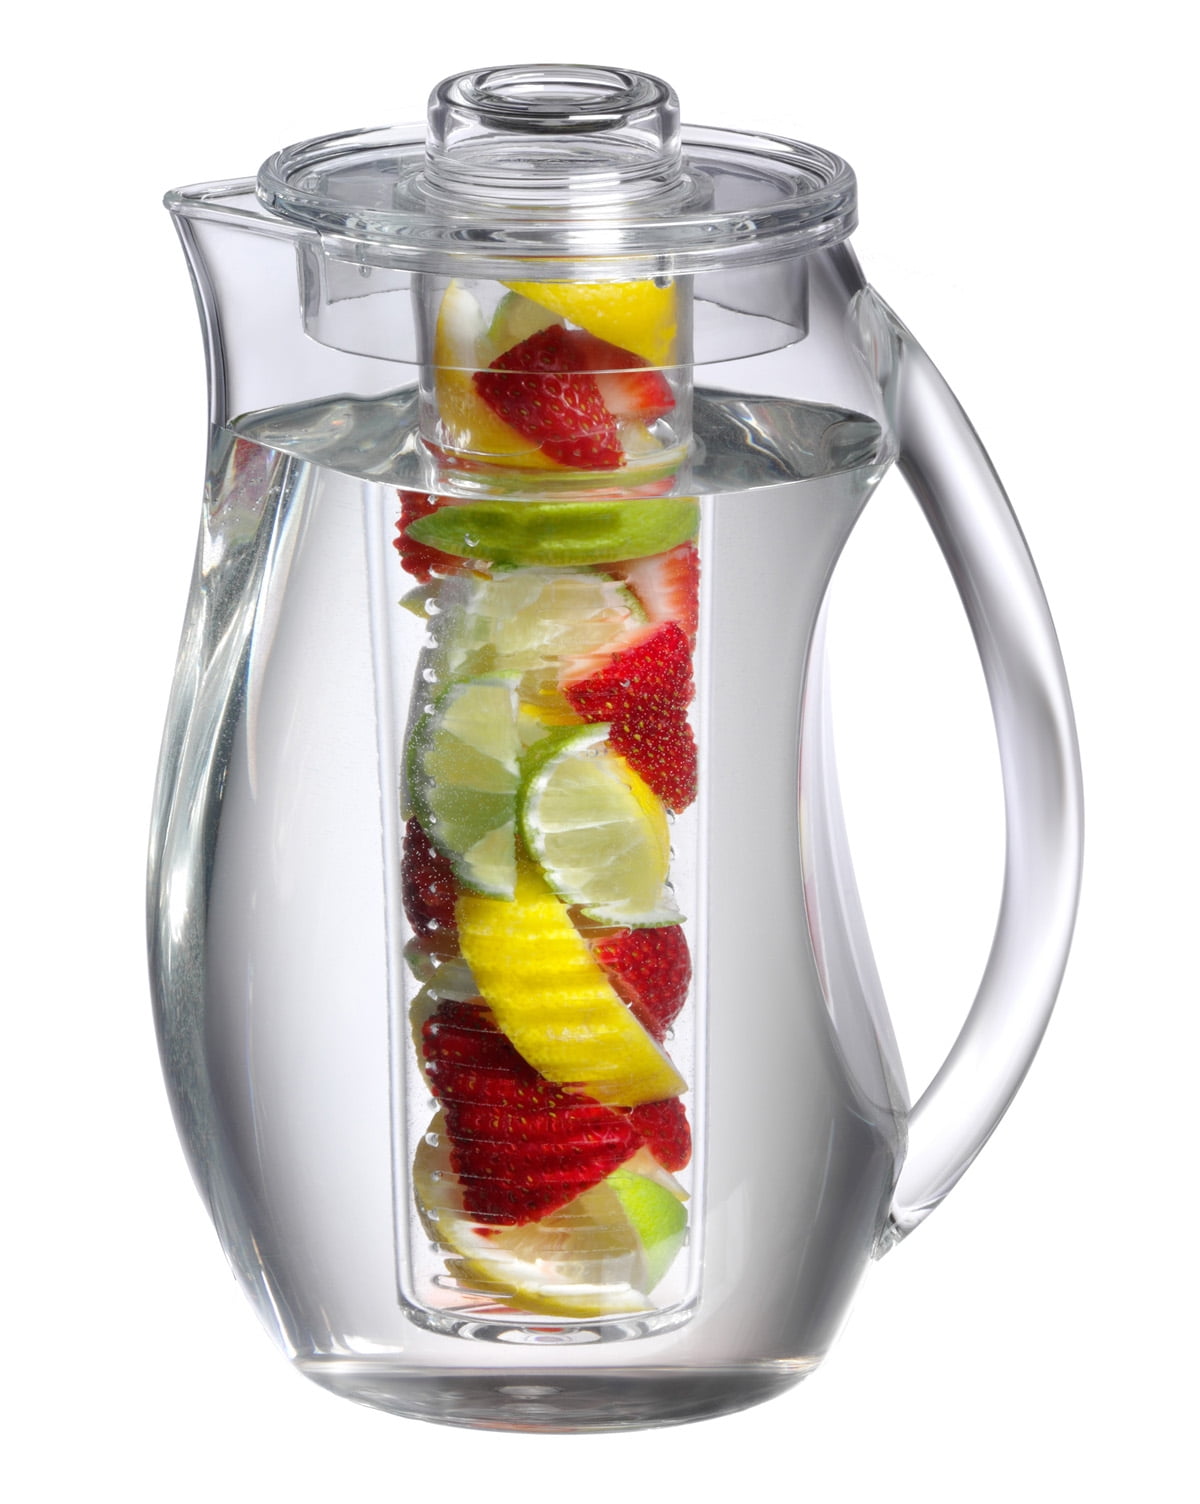  Wyndham House Fruit Infusion Pitcher, 60 Ounce, With Freezer  Gel Base : Home & Kitchen